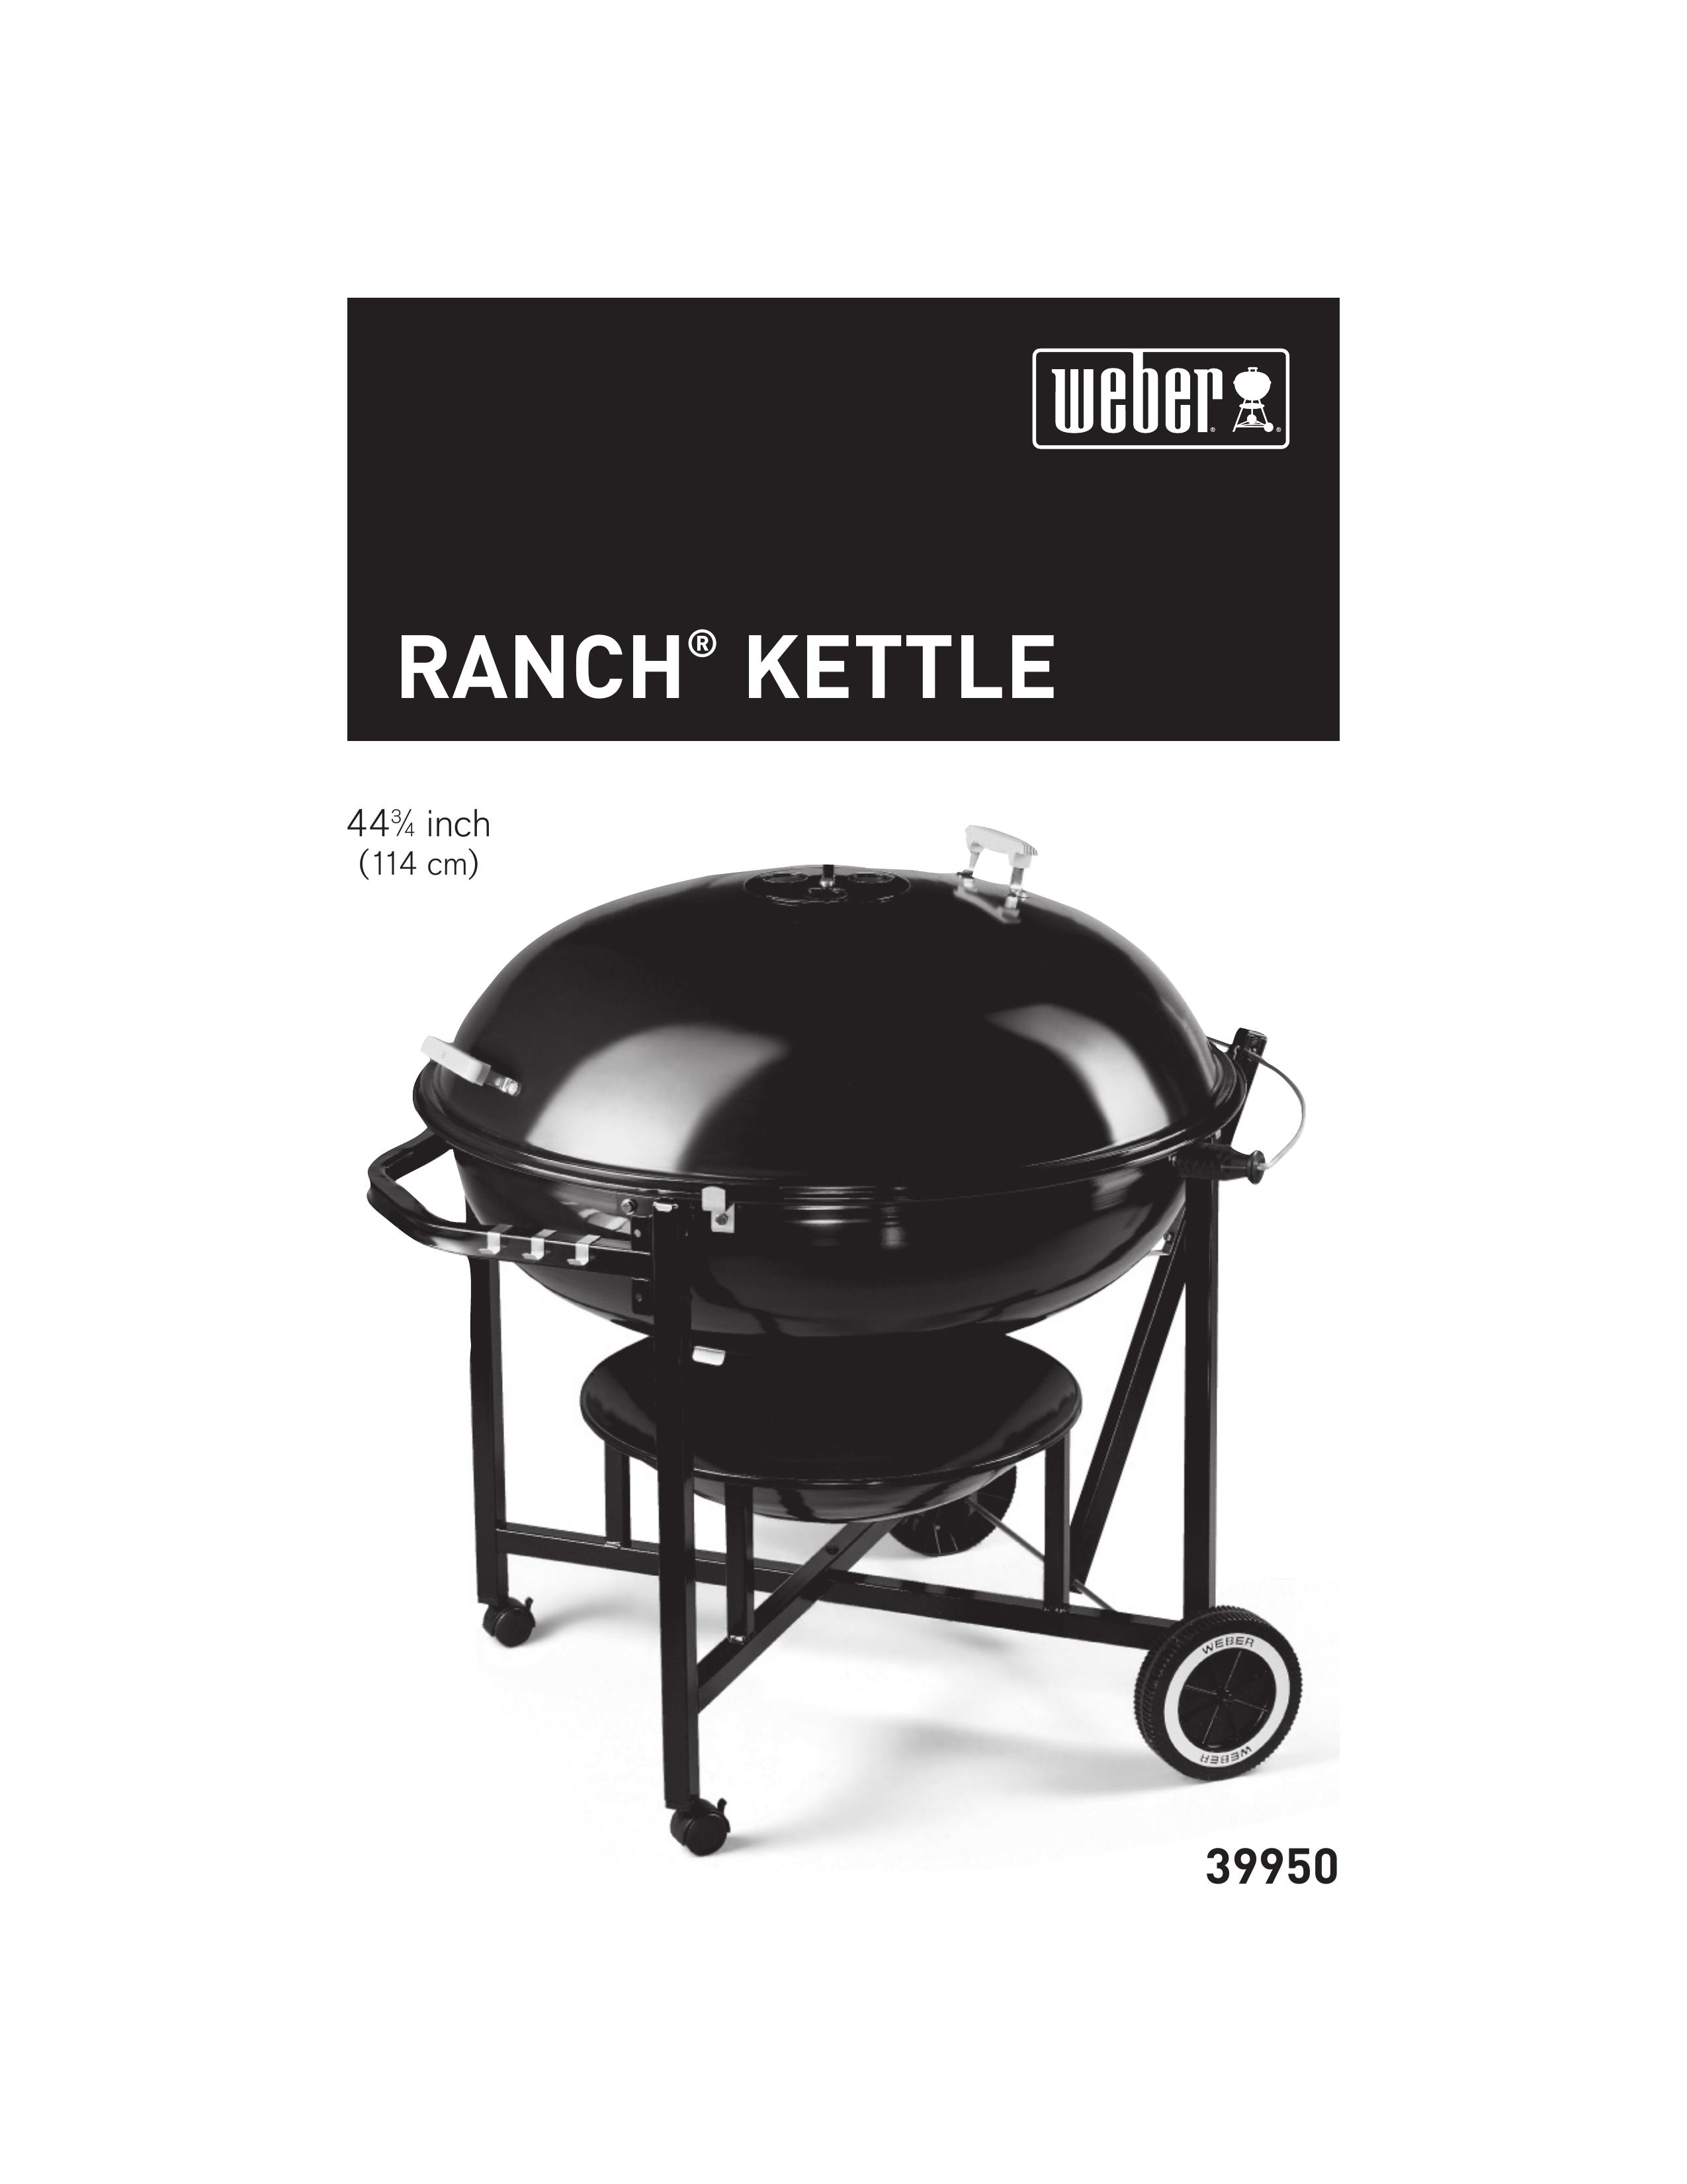 Weber 39950 Charcoal Grill User Manual